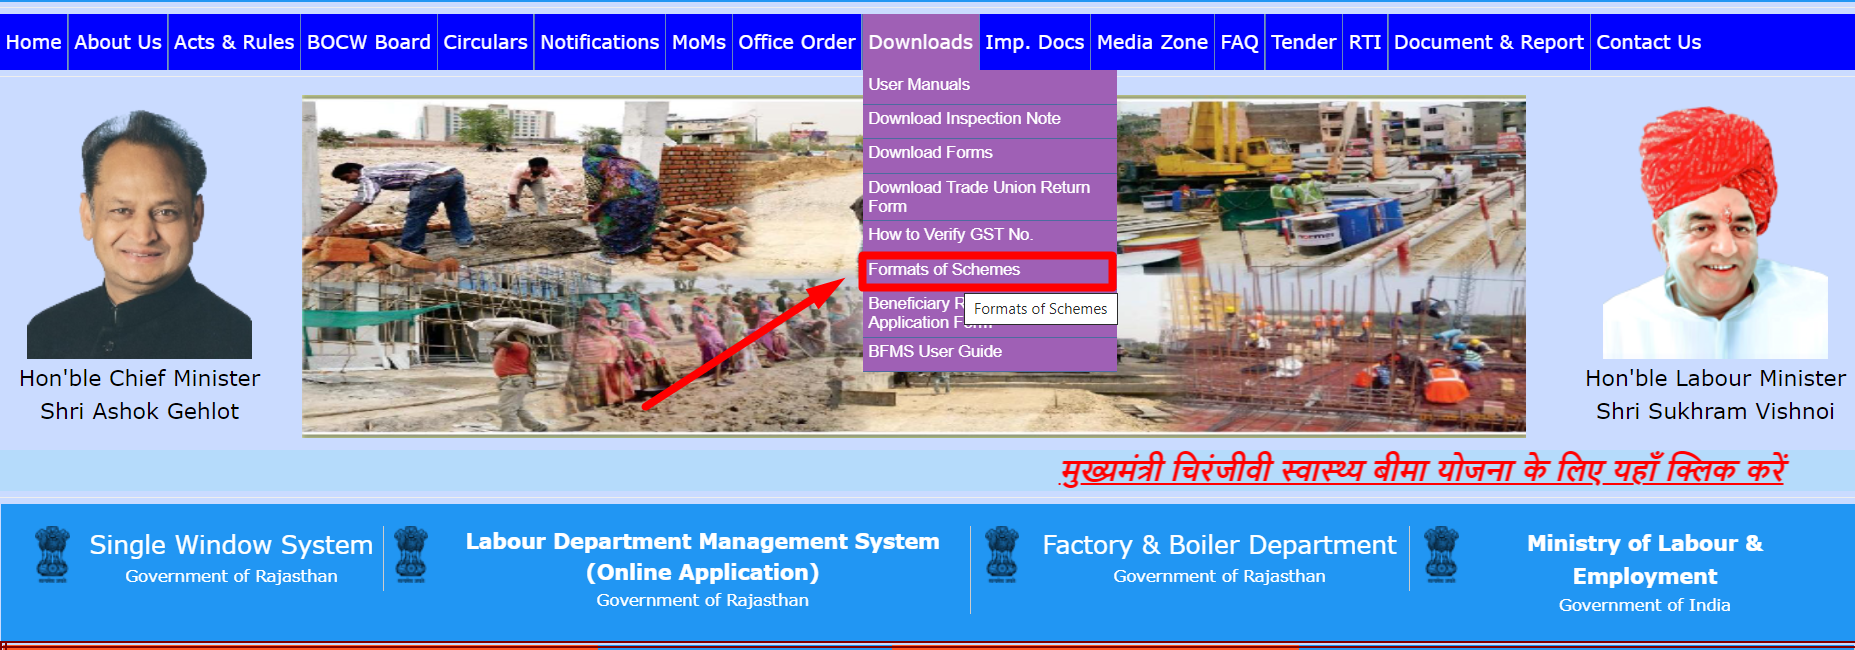 raajsthan-labour-deparment-format-of-schemes.png